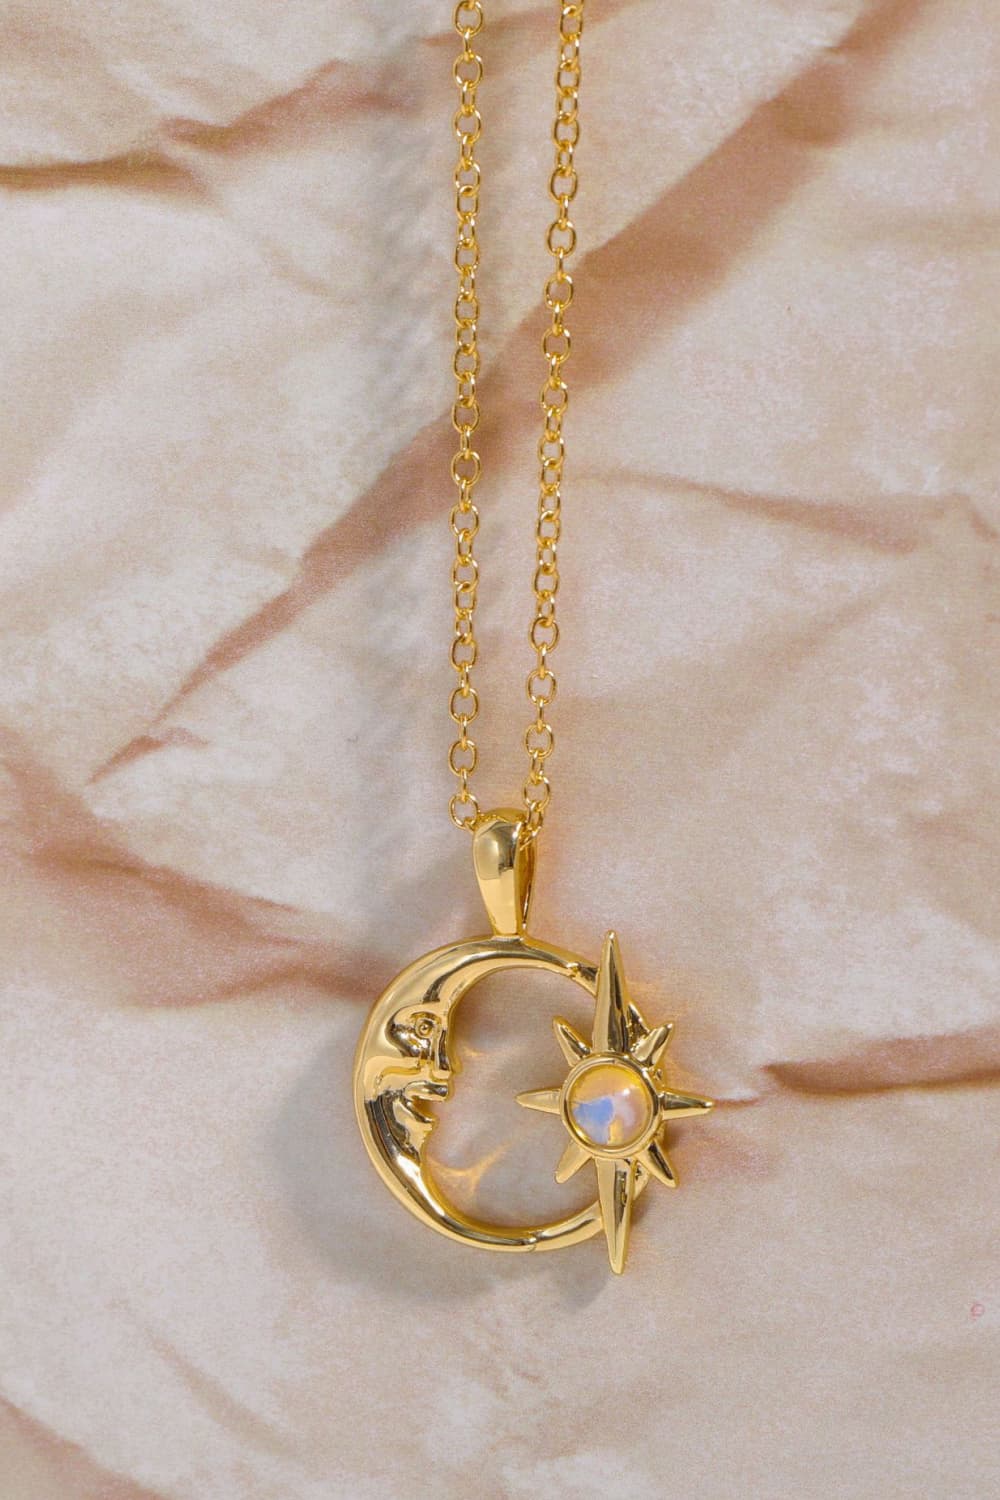 Copper 14K Gold Pleated Moon & Star Shape Pendant Necklace - Guy Christopher